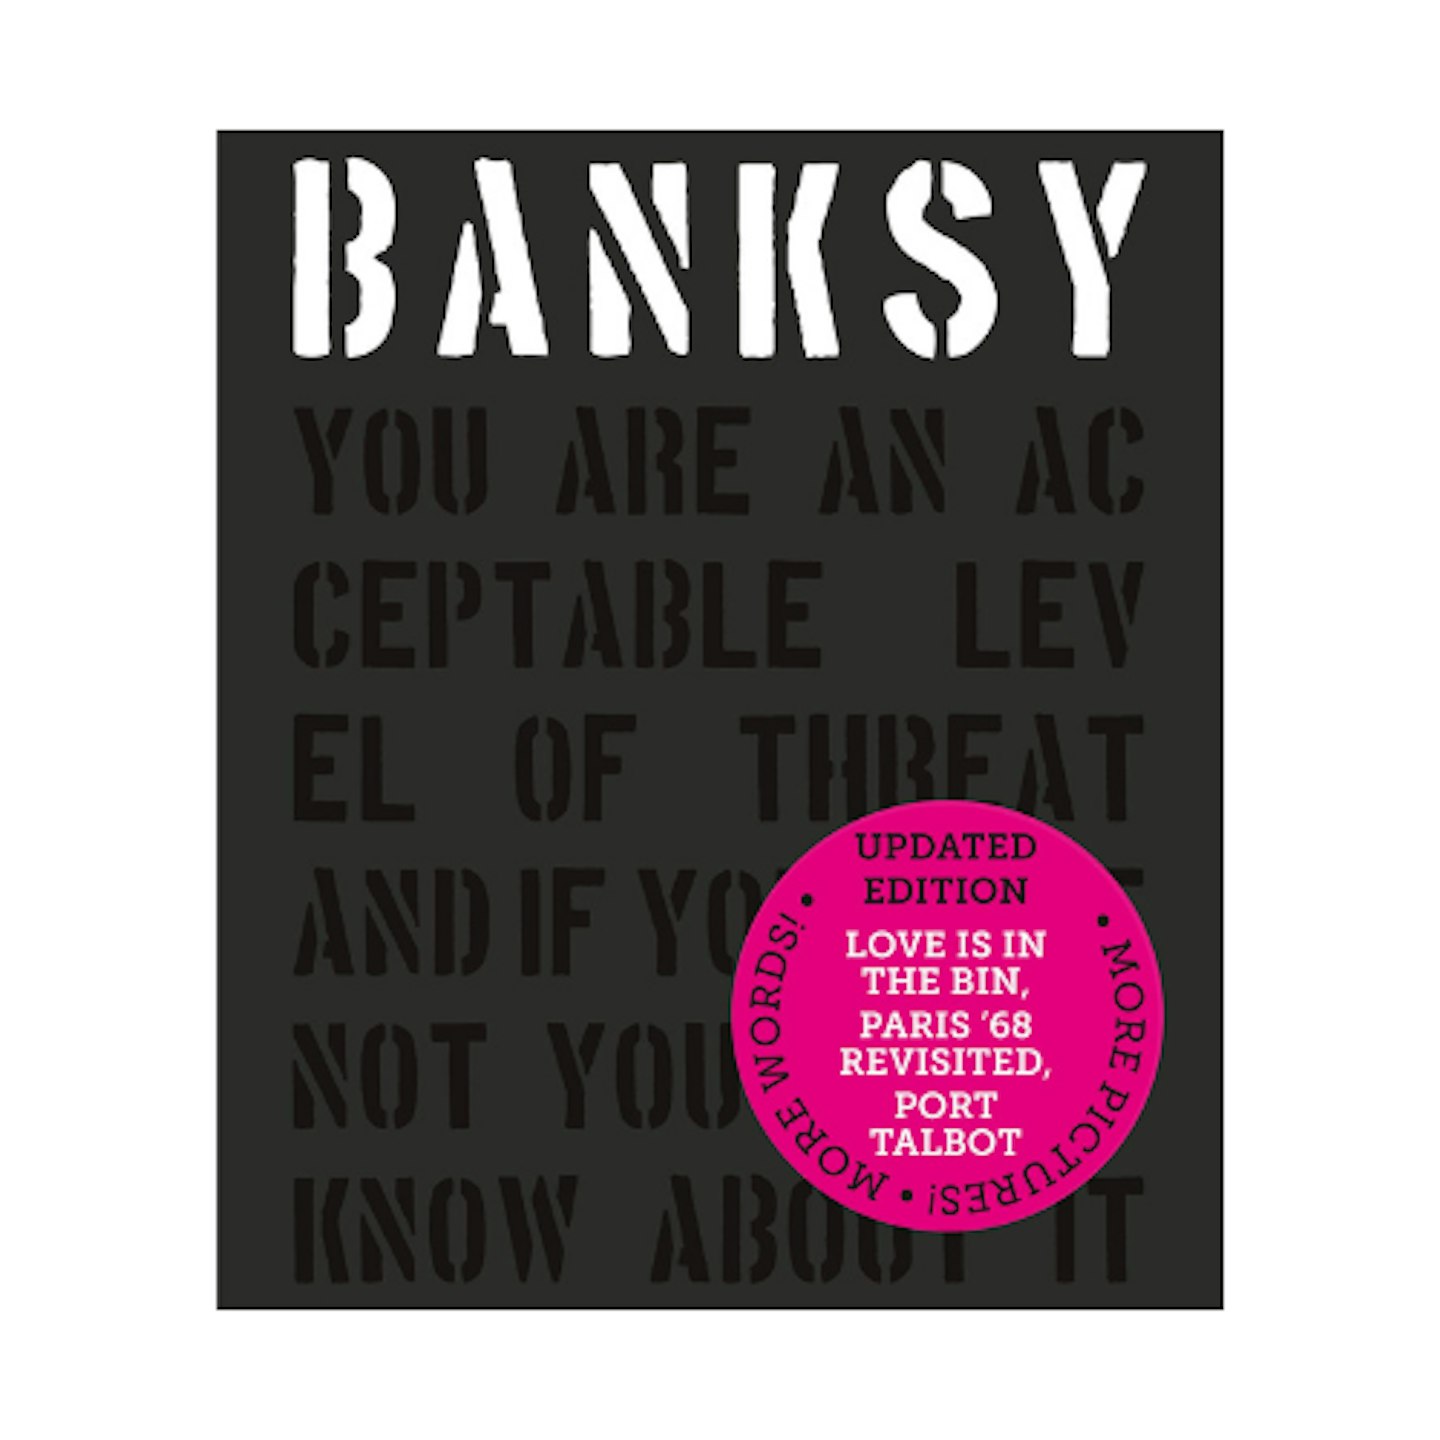 Banksy You Are an Acceptable Level of Threat and if You Were Not You Would Know About It book on white background